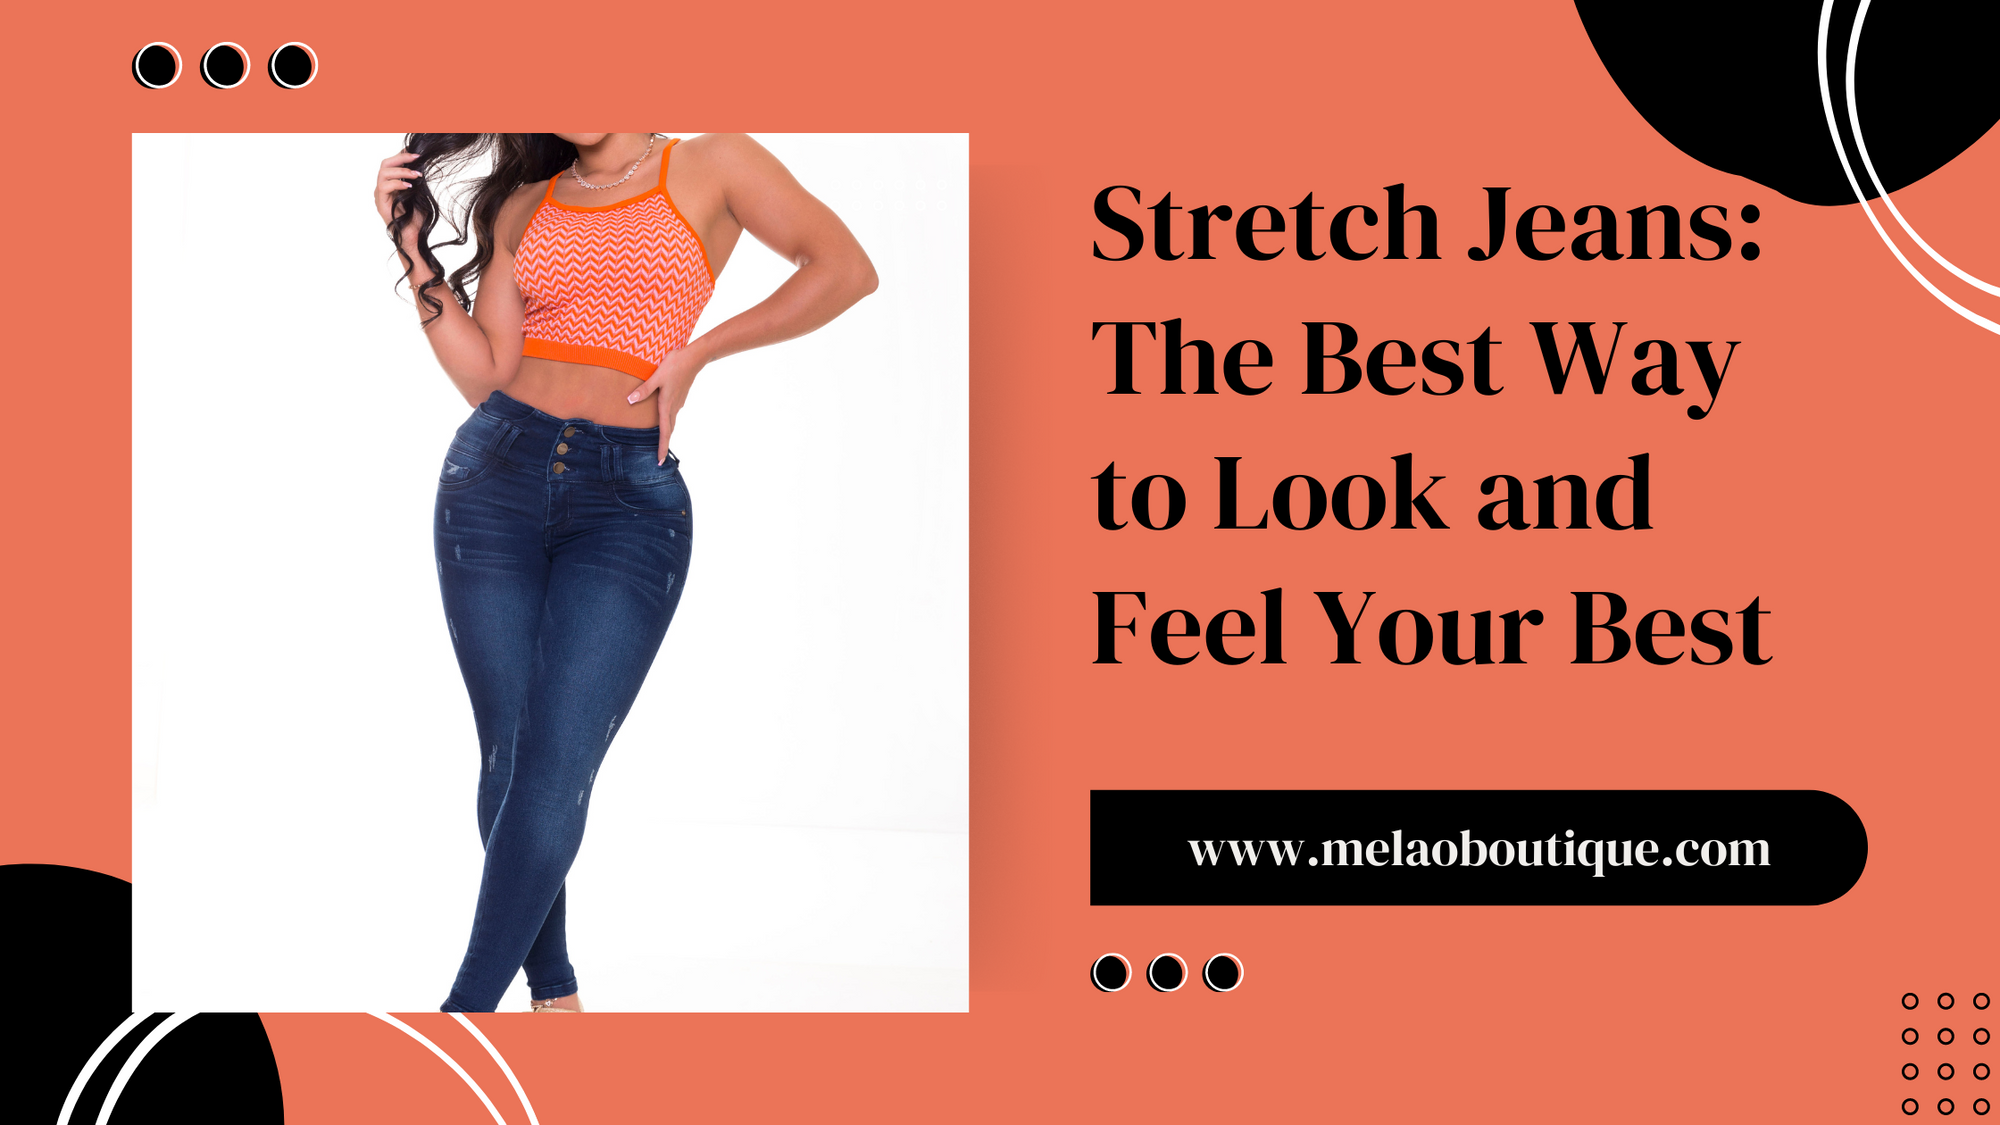 Stretch Jeans The Best Way to Look and Feel Your Best